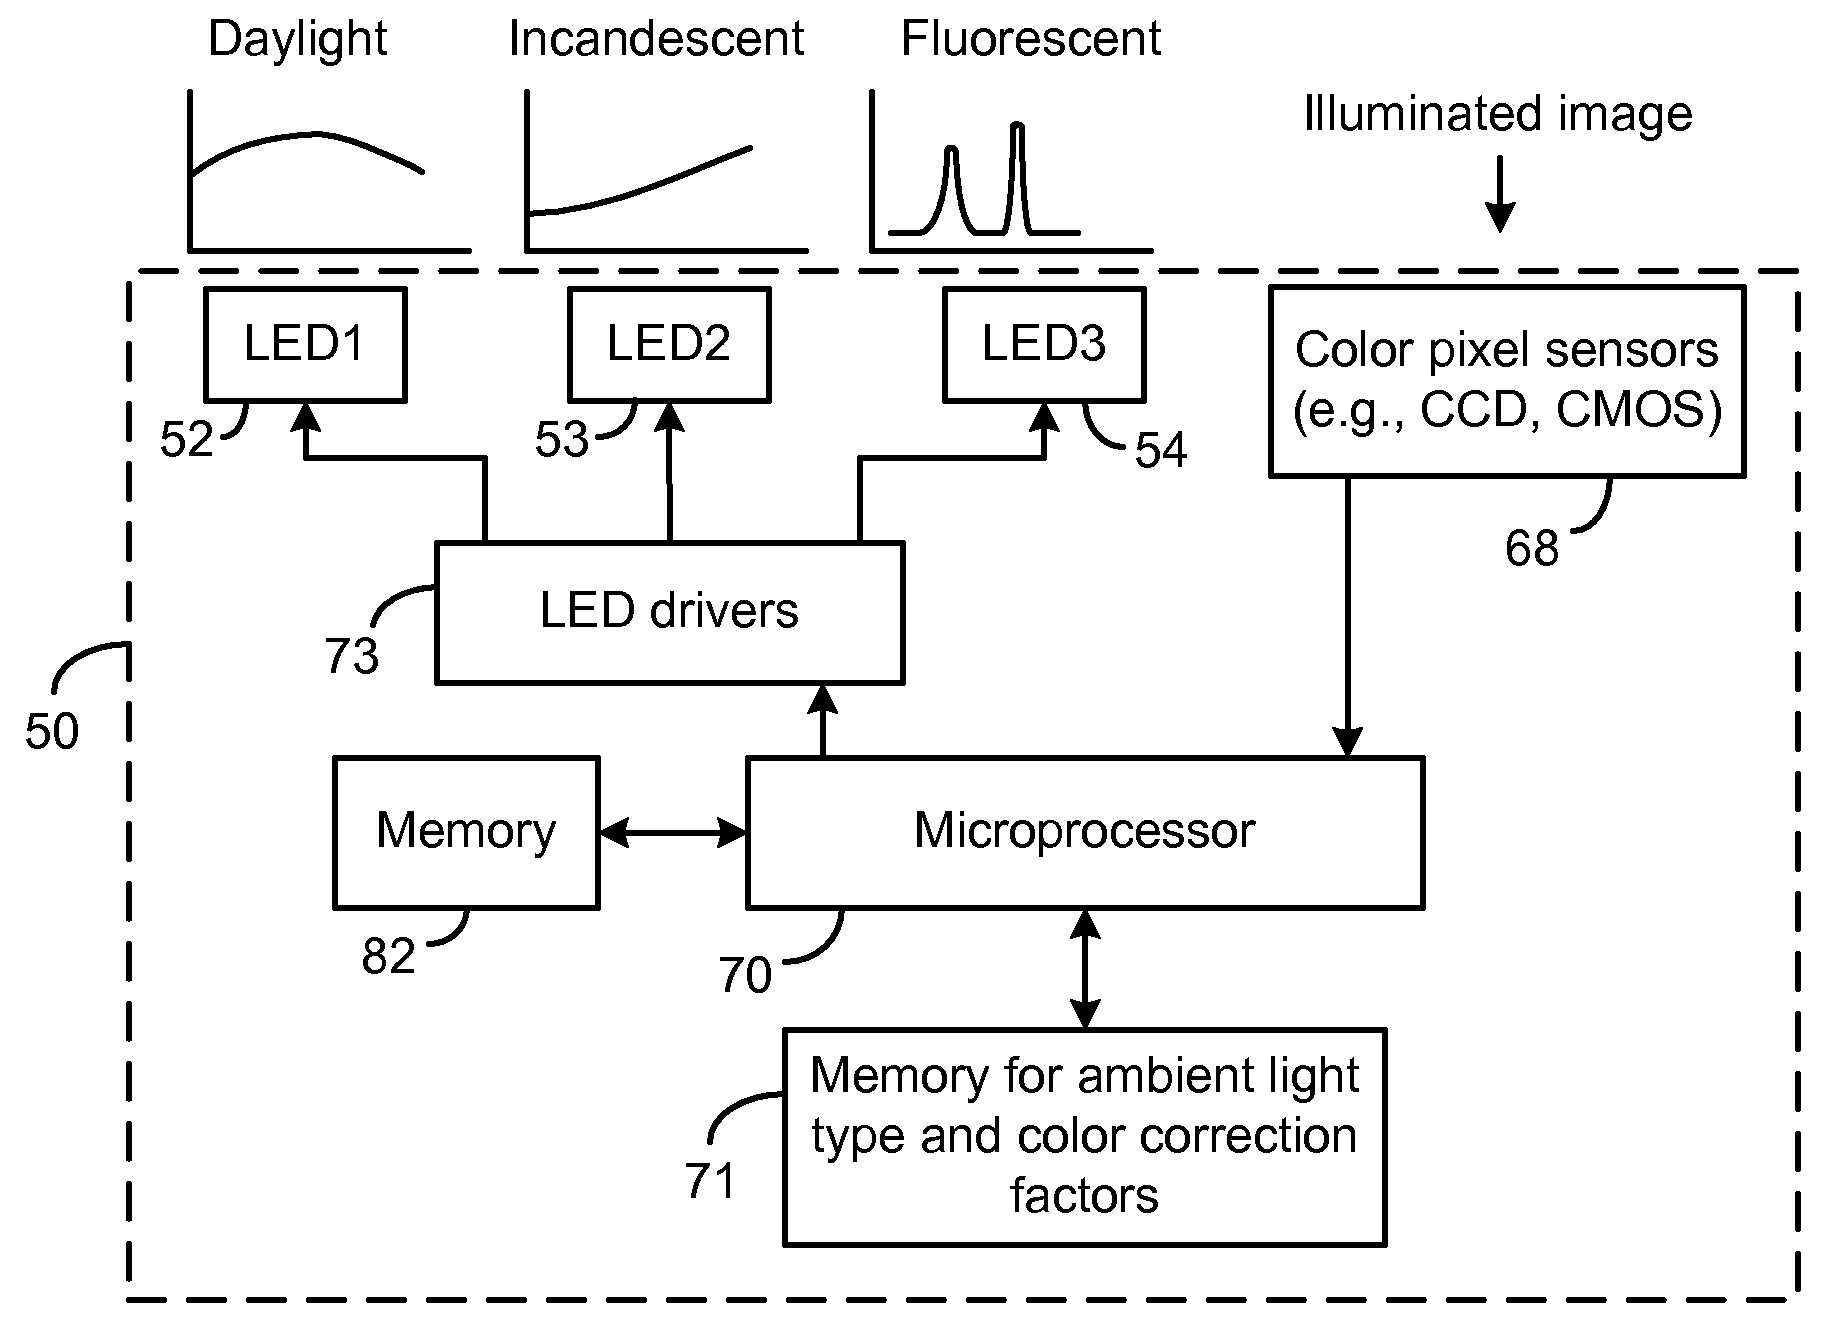 Matching LED flash to camera's ambient light compensation algorithm